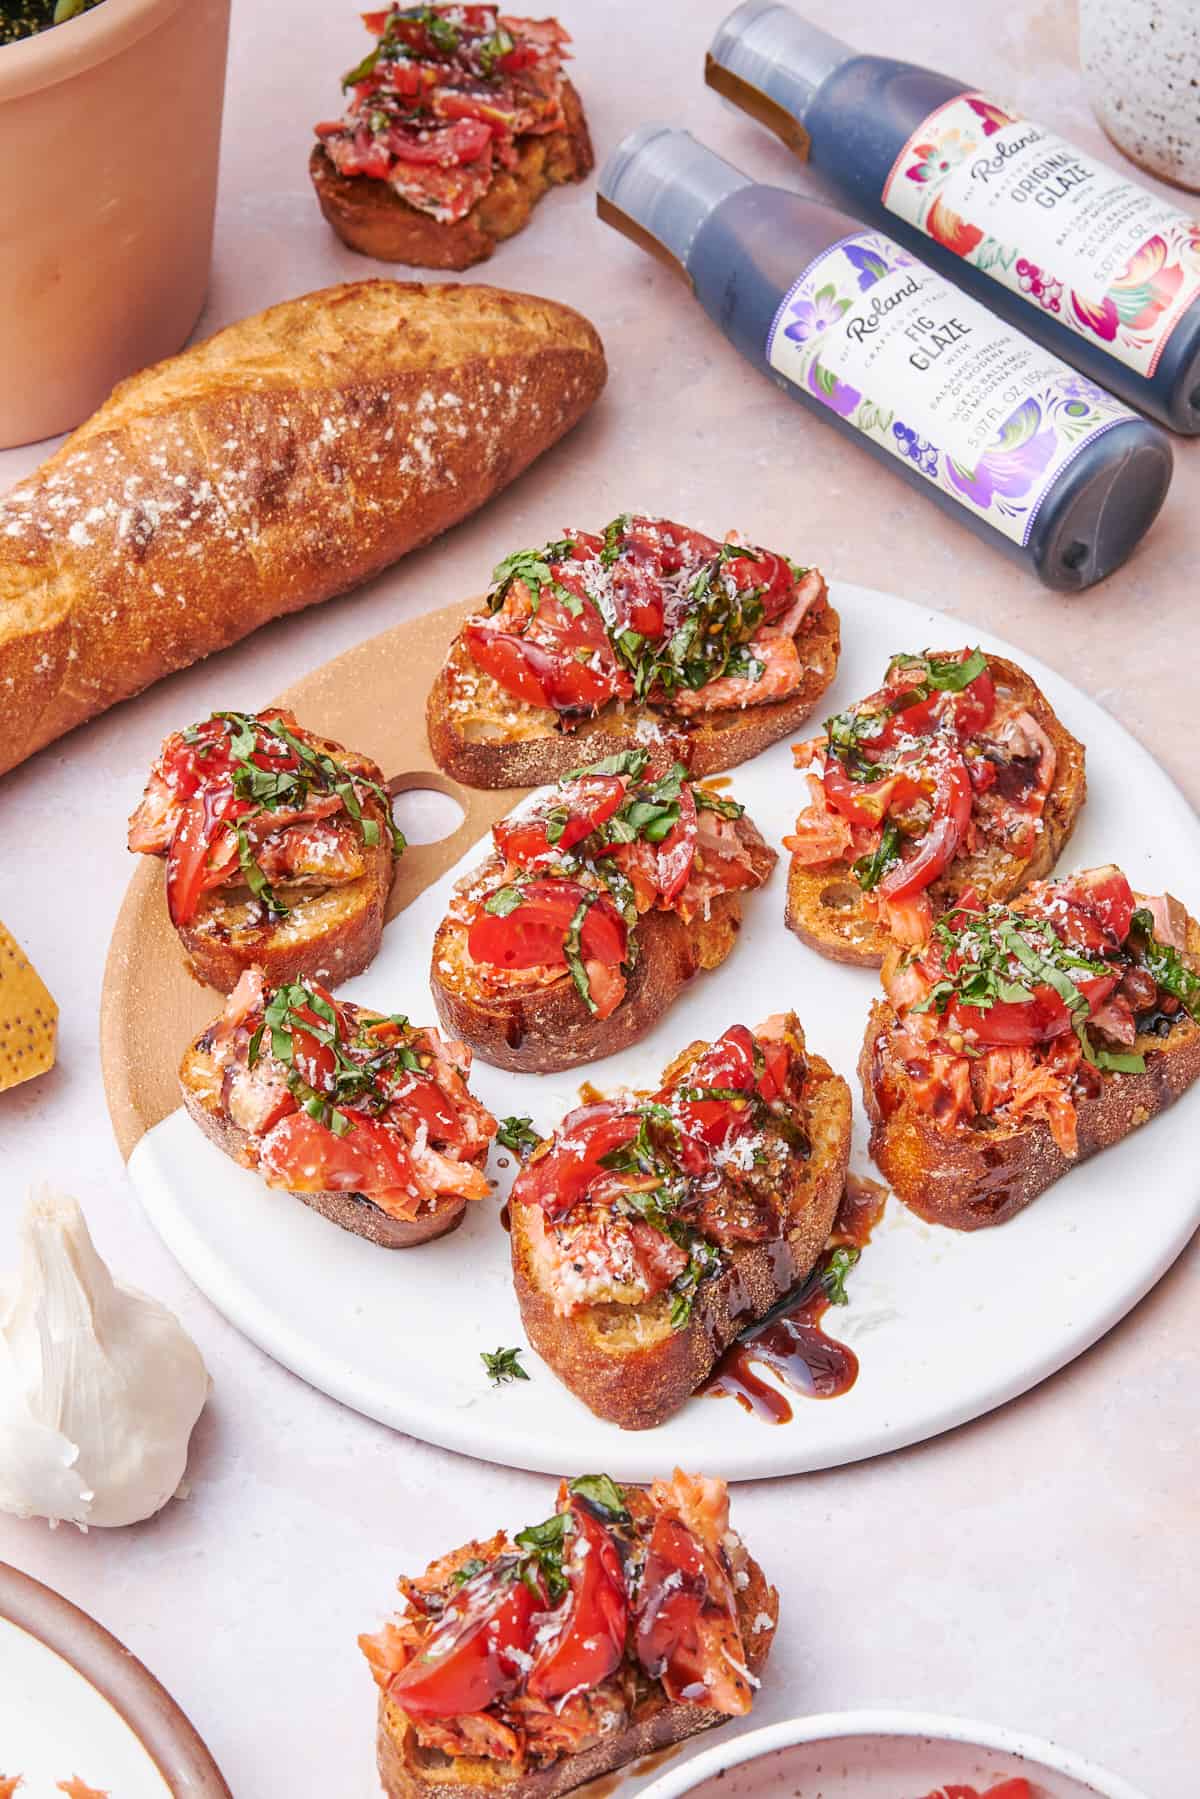 salmon bruschetta on a plate with bread, garlic, and roland balsamic glazes nearby.